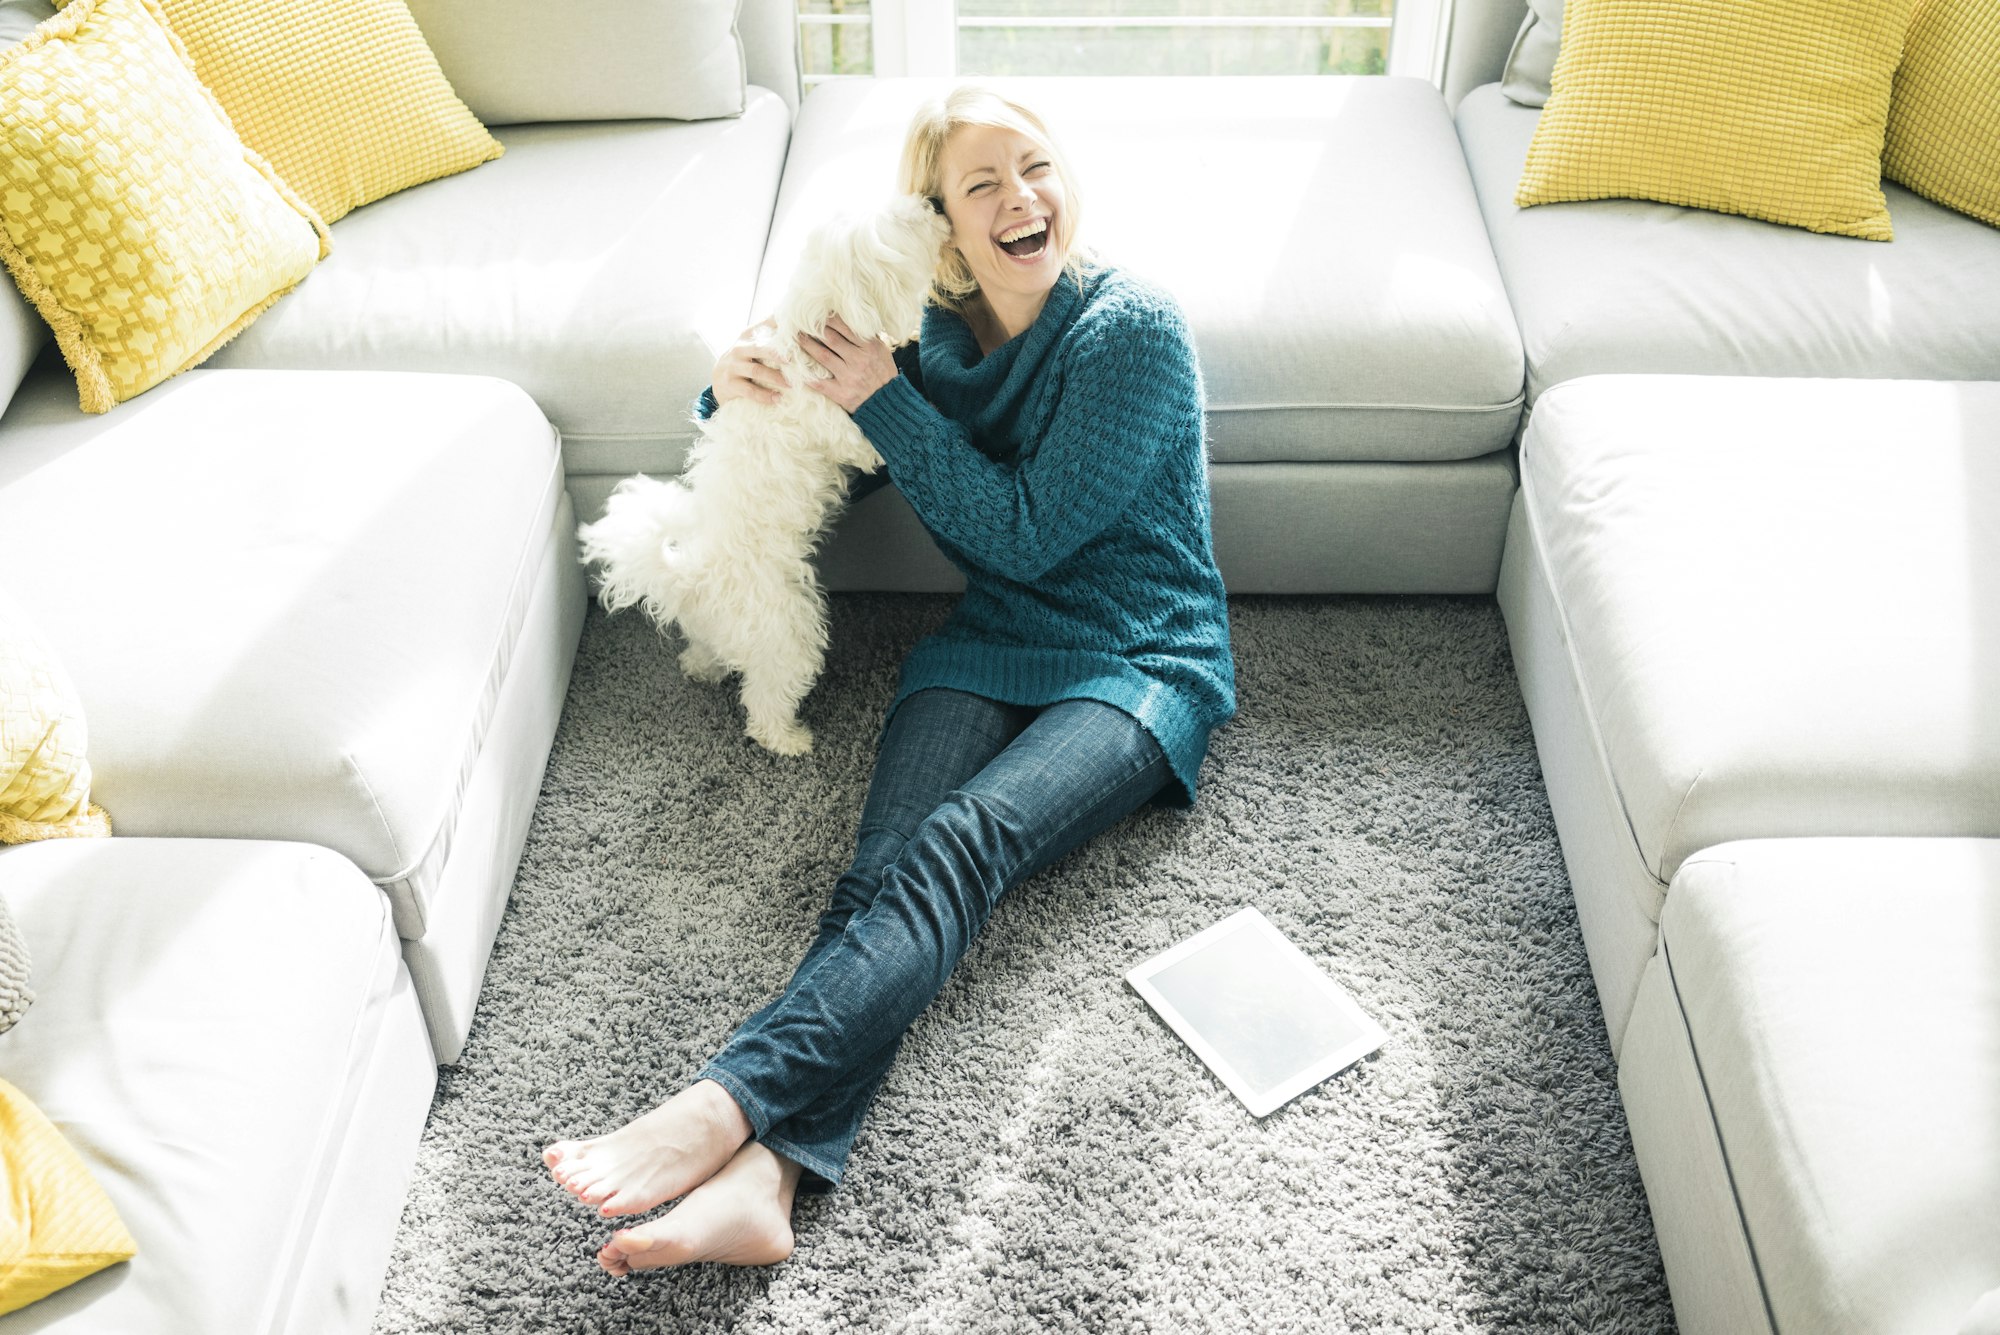 Playful woman with dog in living room